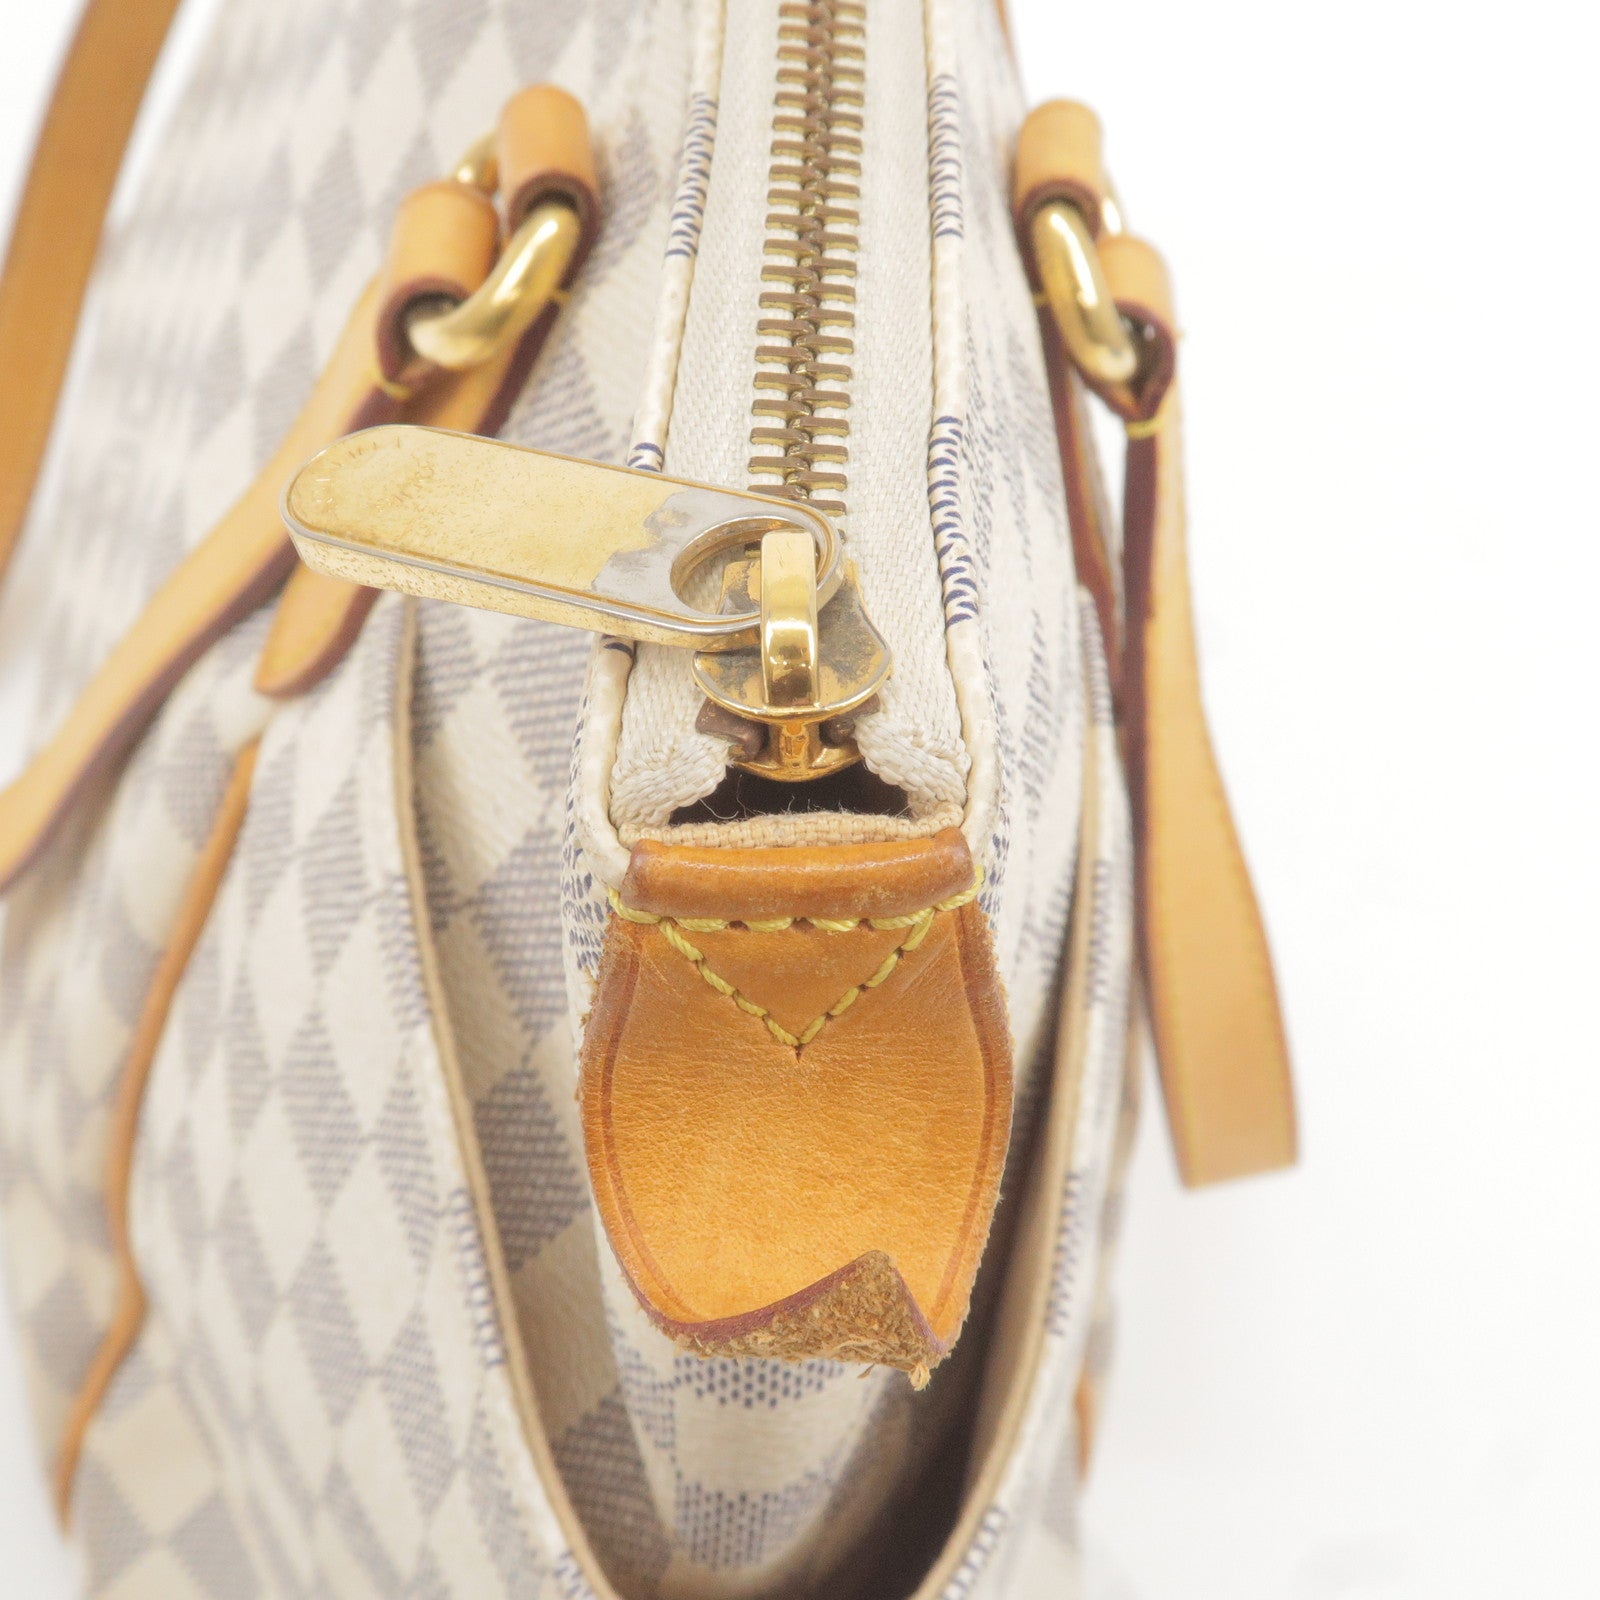 Louis+Vuitton+Totally+Beige+Strap+Shoulder+Bag+MM+Brown+Canvas for